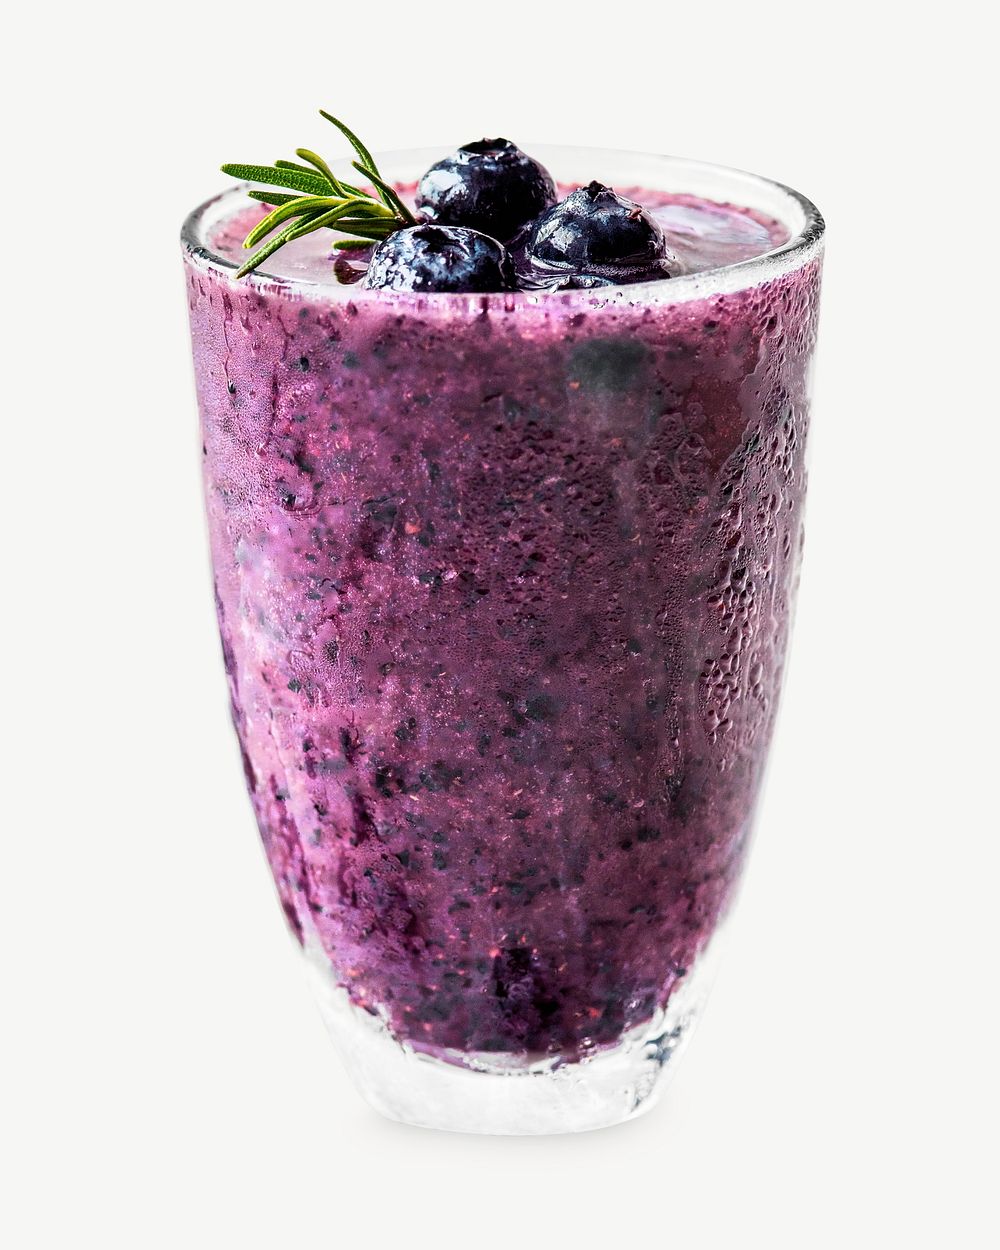 Blueberry smoothie collage element psd